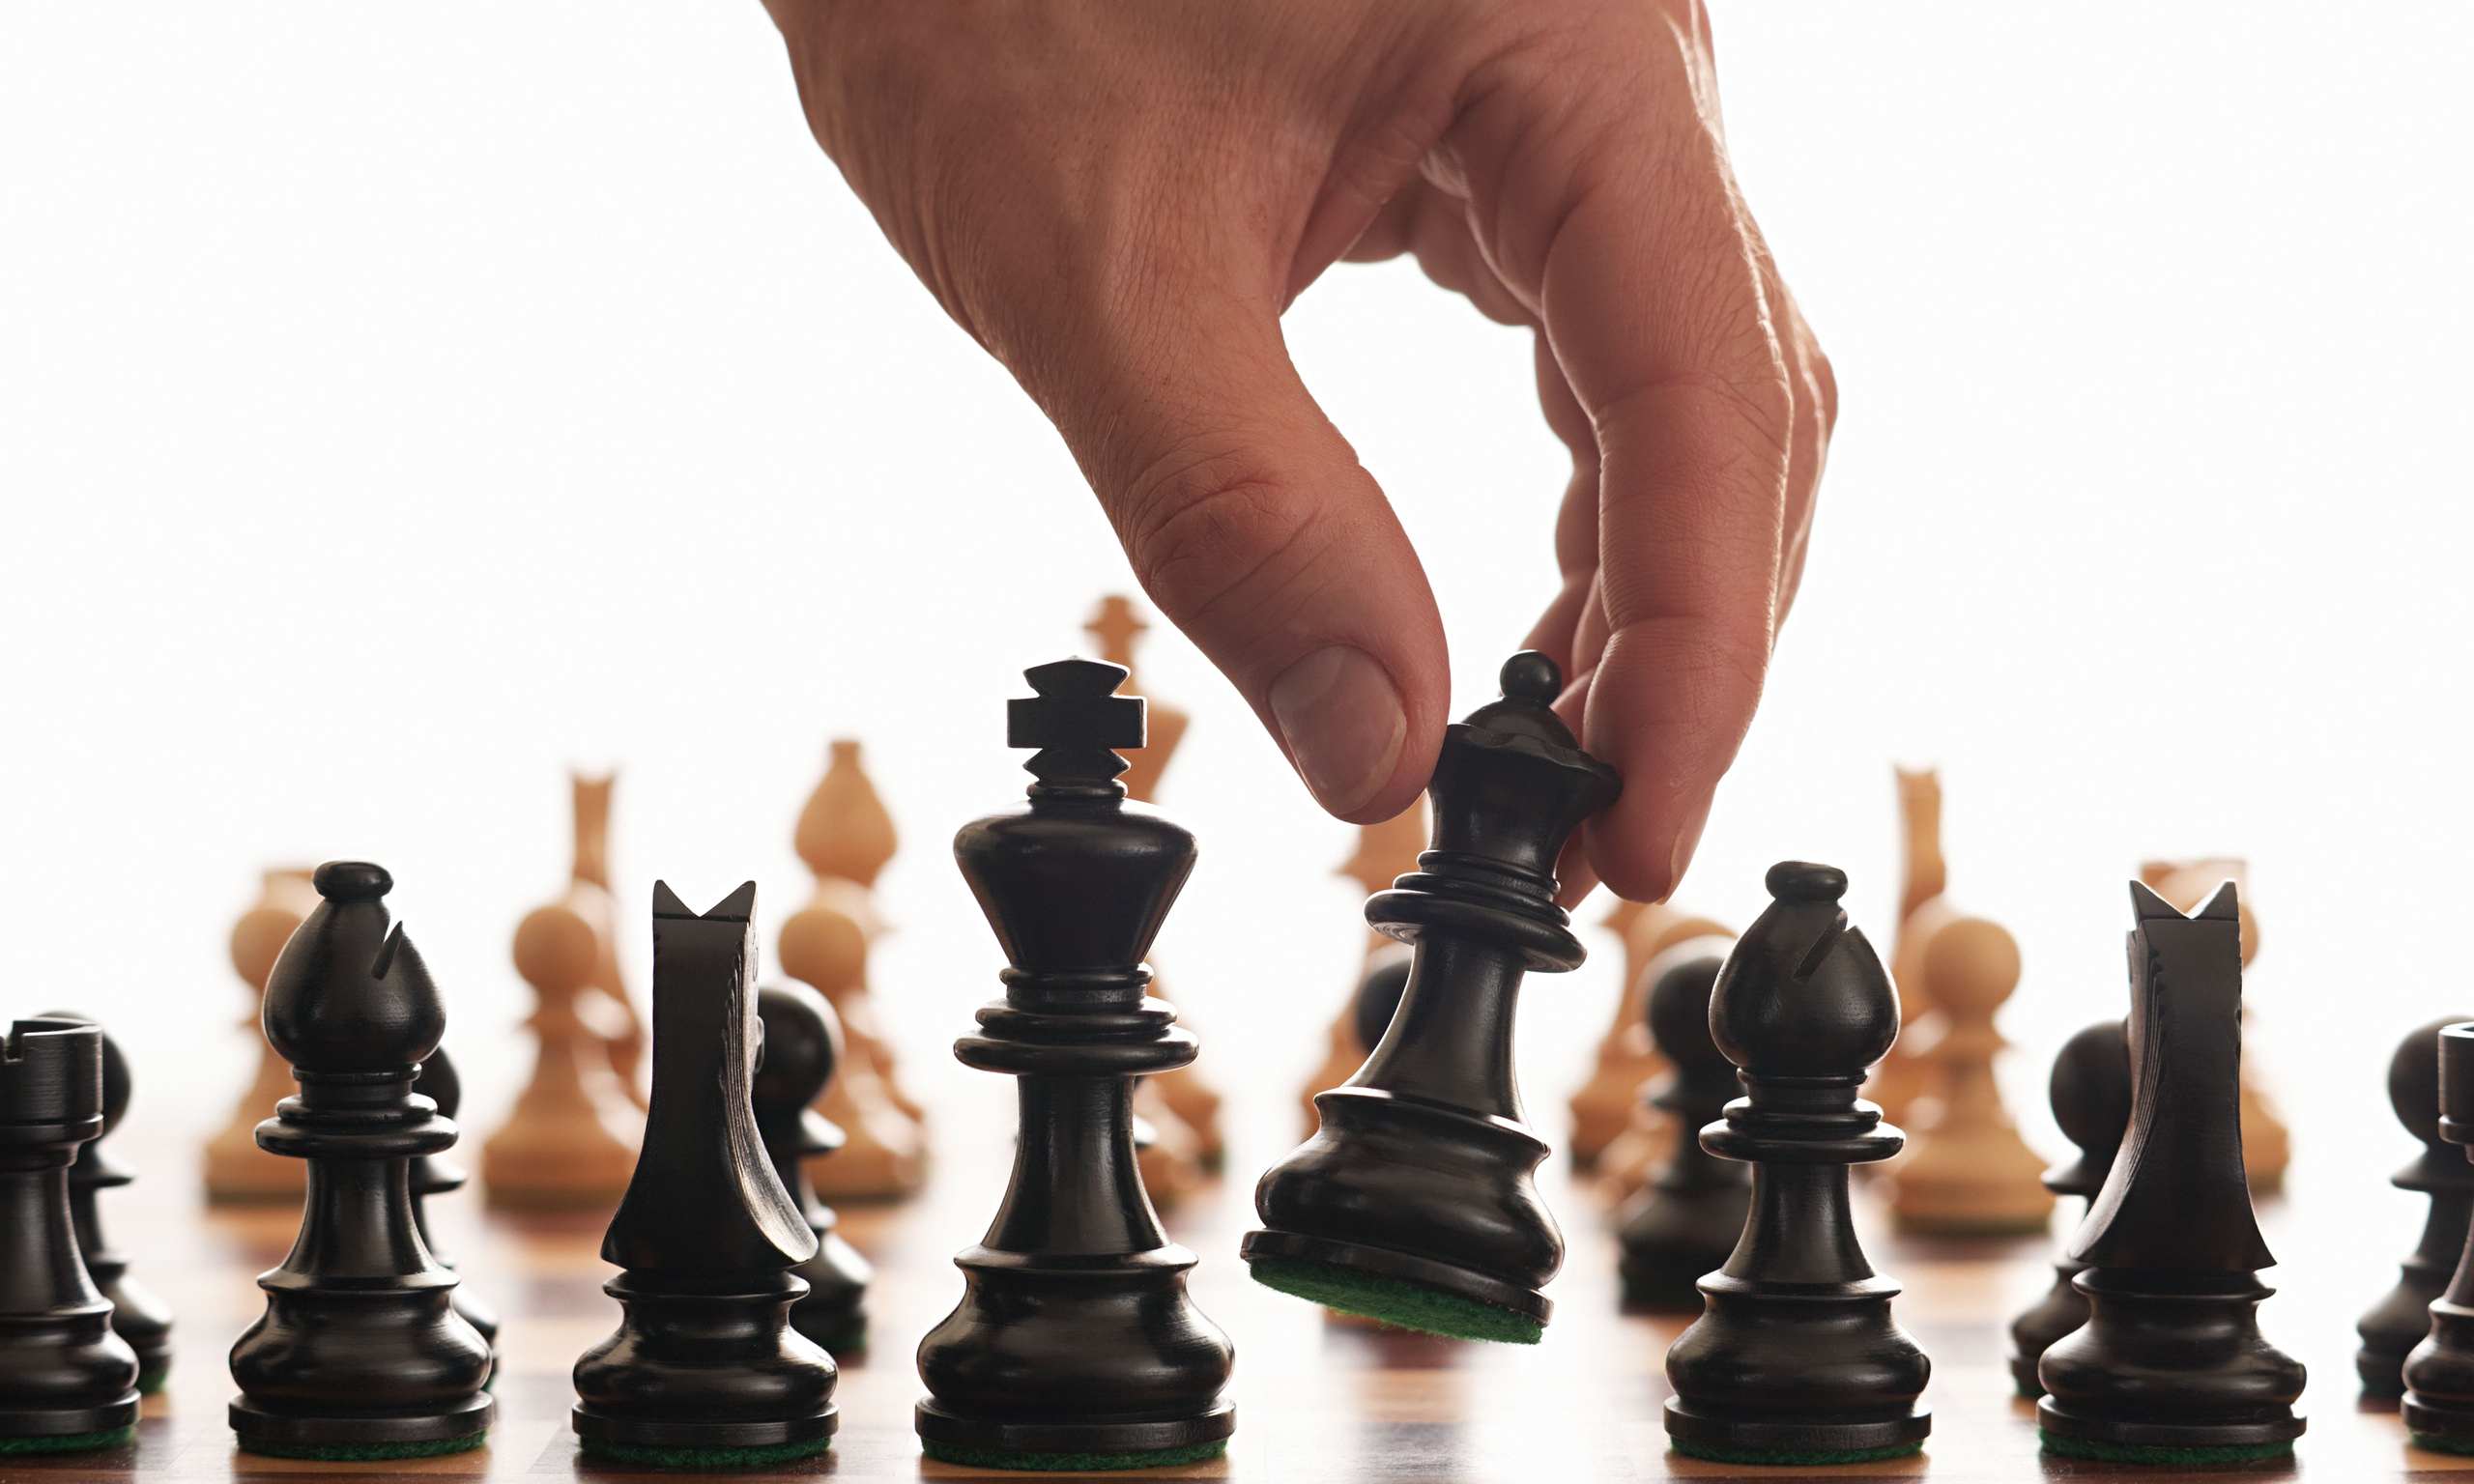 A hand moving a chess piece during a game